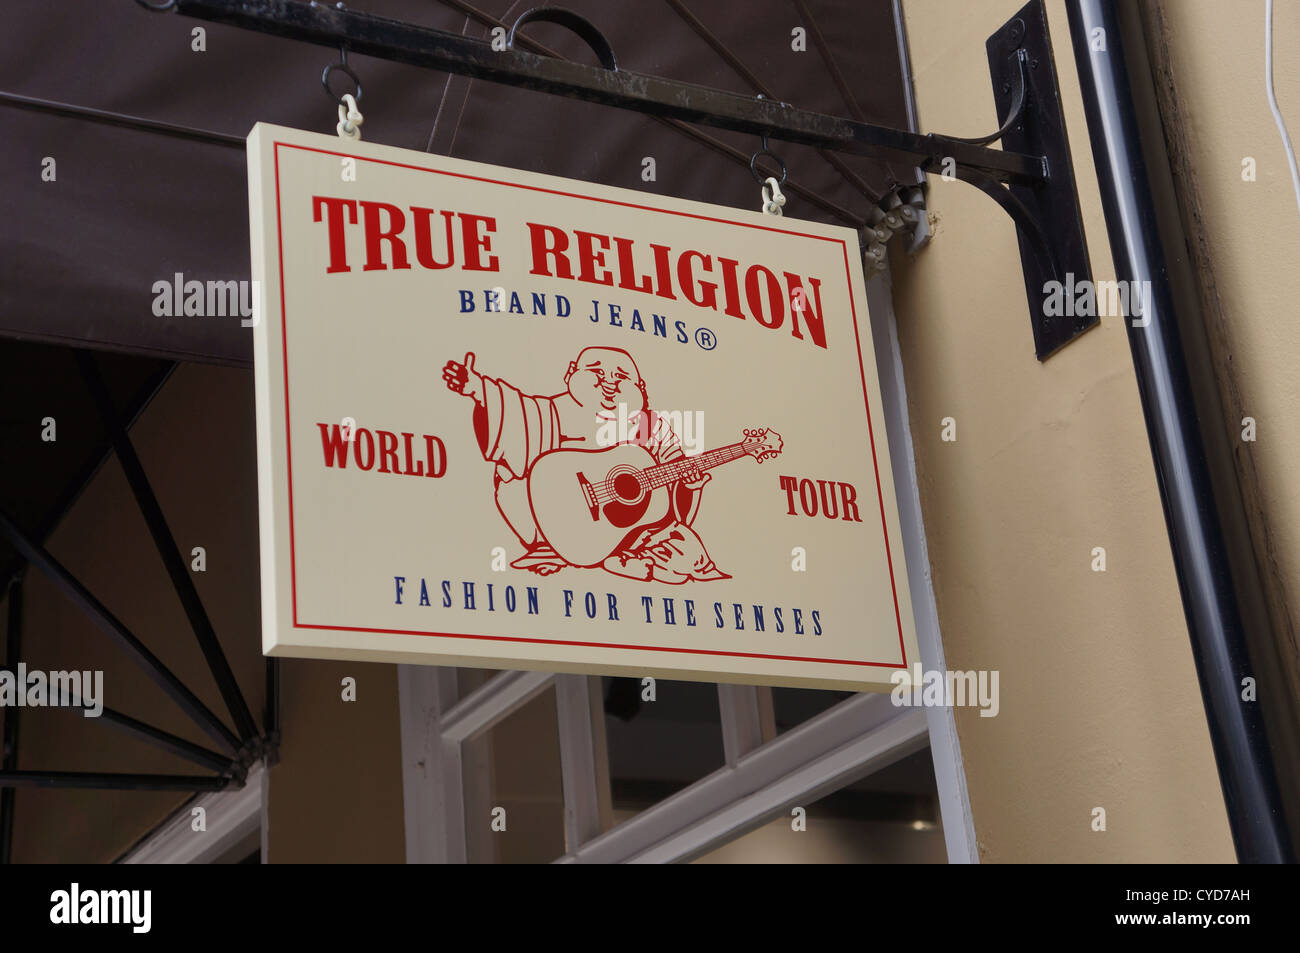 True Religion Jeans Greeting Card by Merlin Wunsch